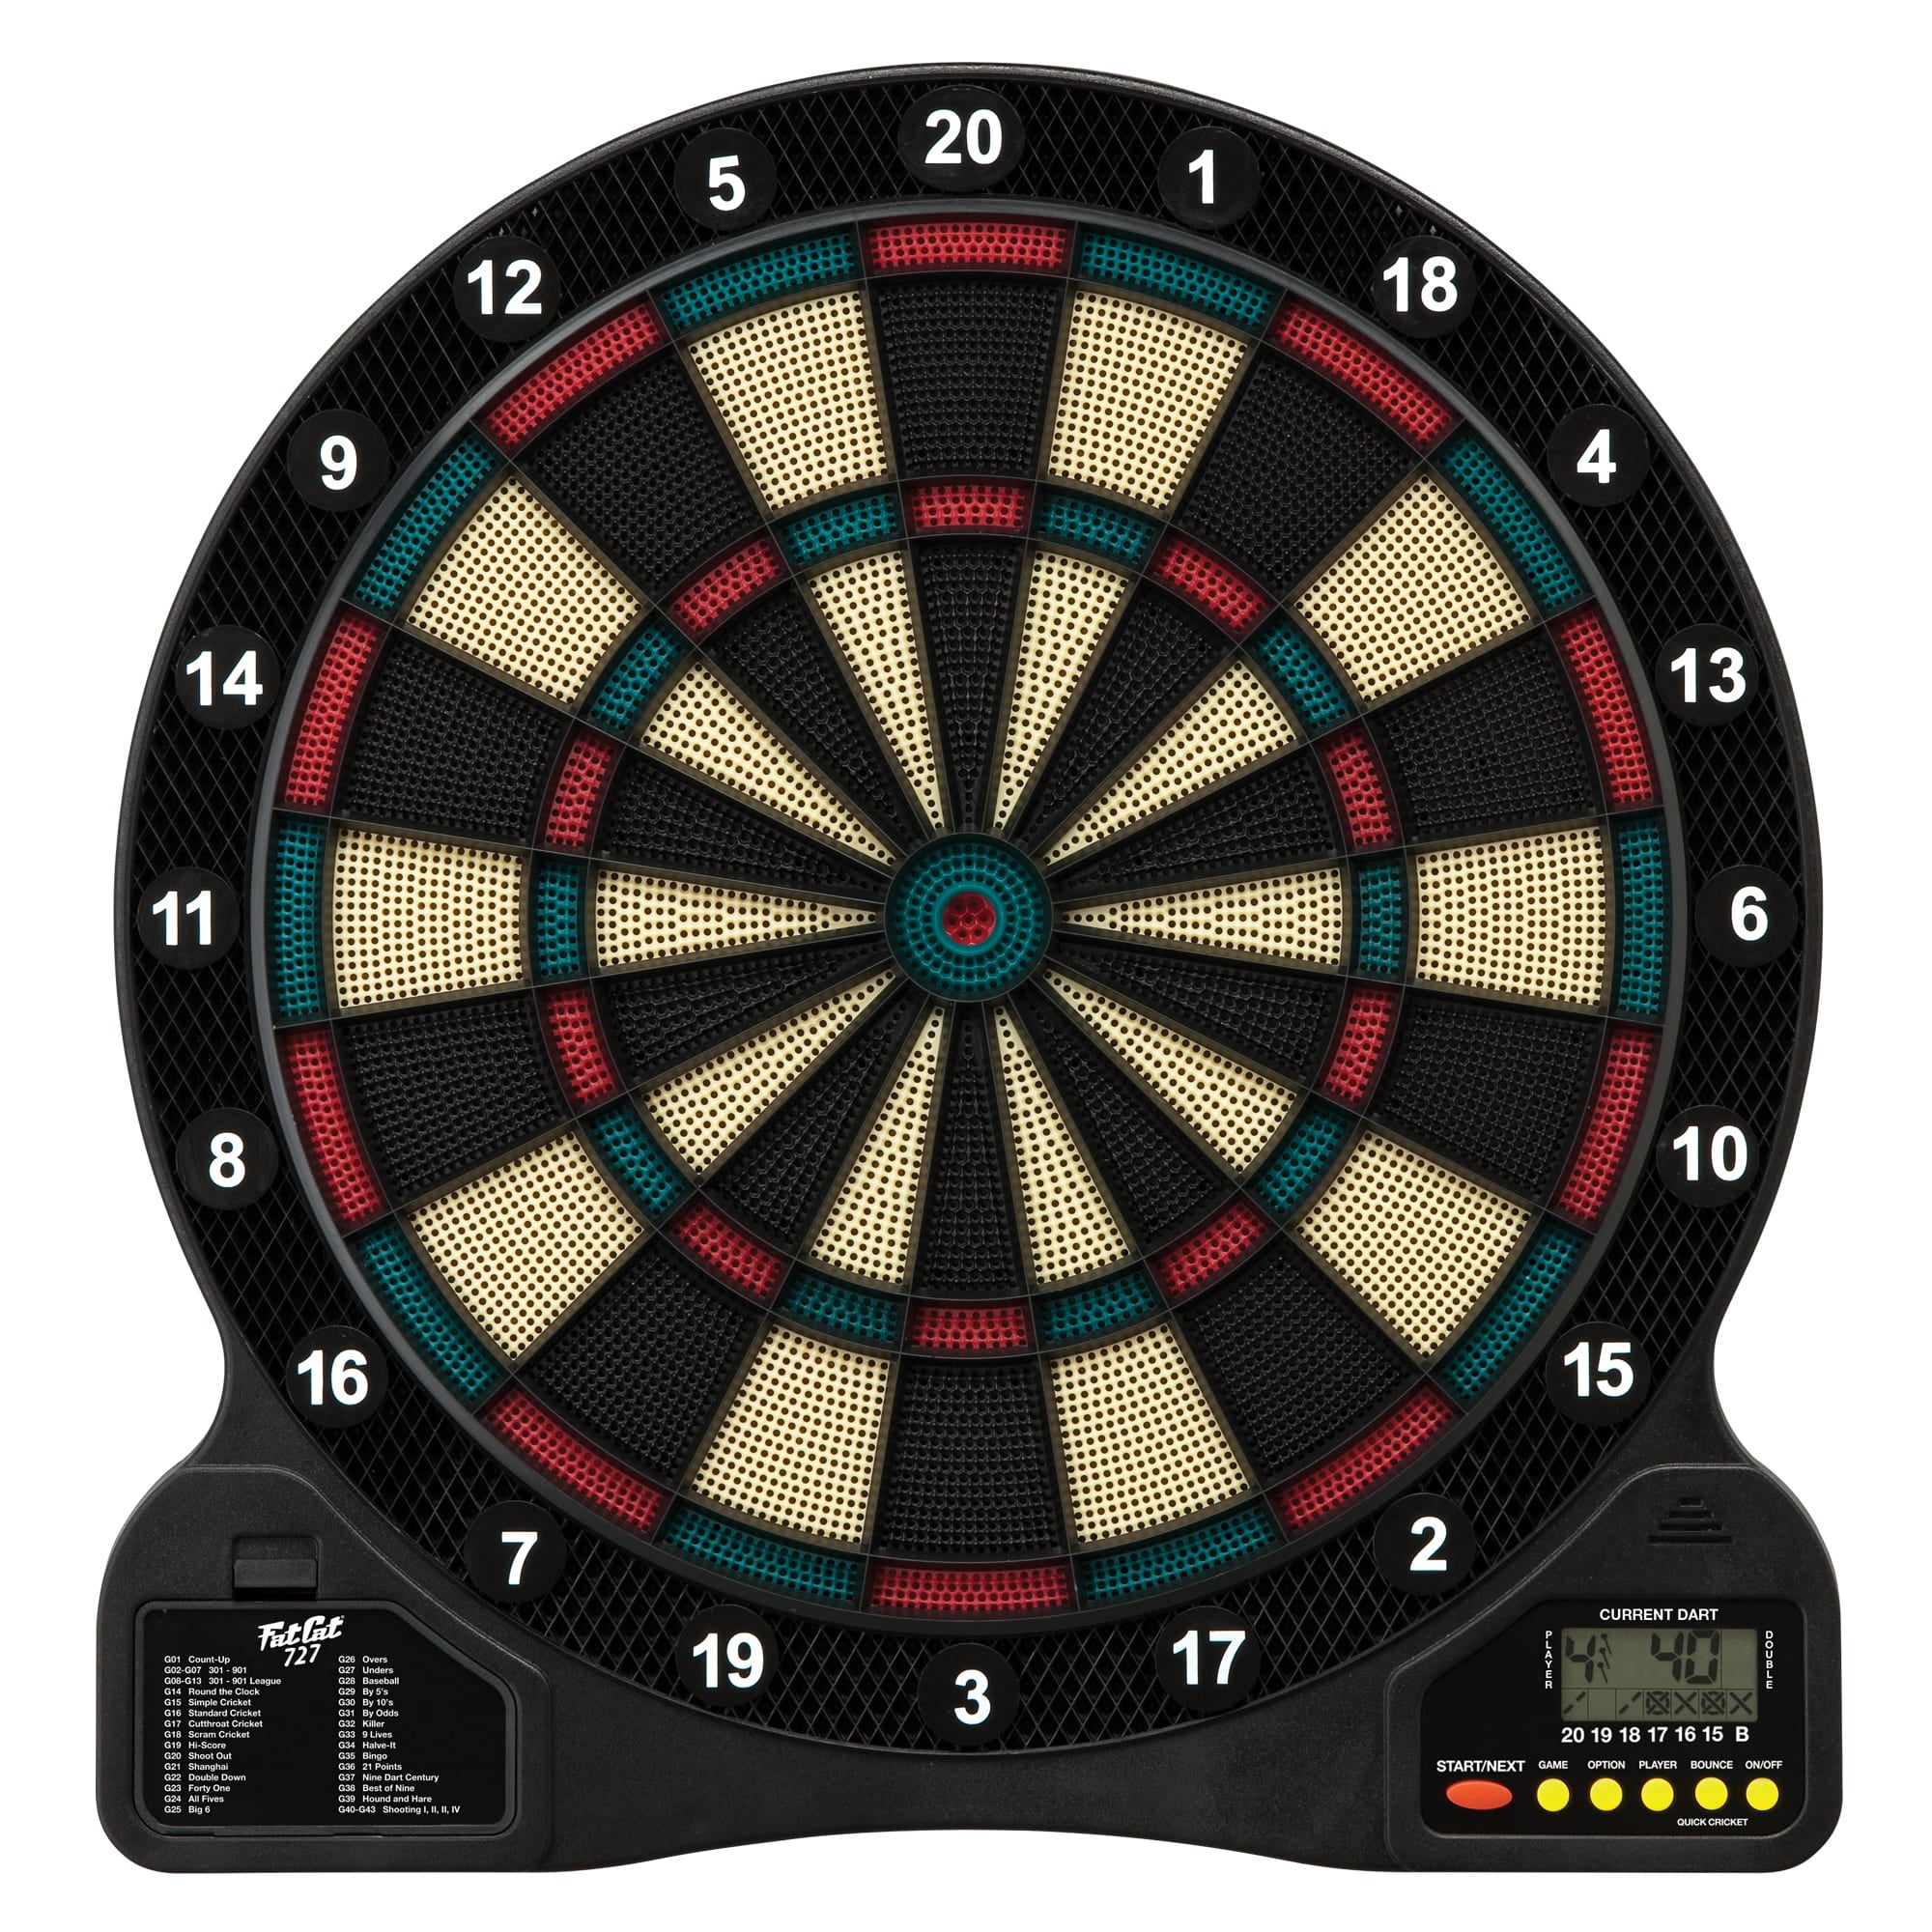 Ultra Thin Spider For Increased Scoring Area Viper 787 Electronic Dartboard Fr 